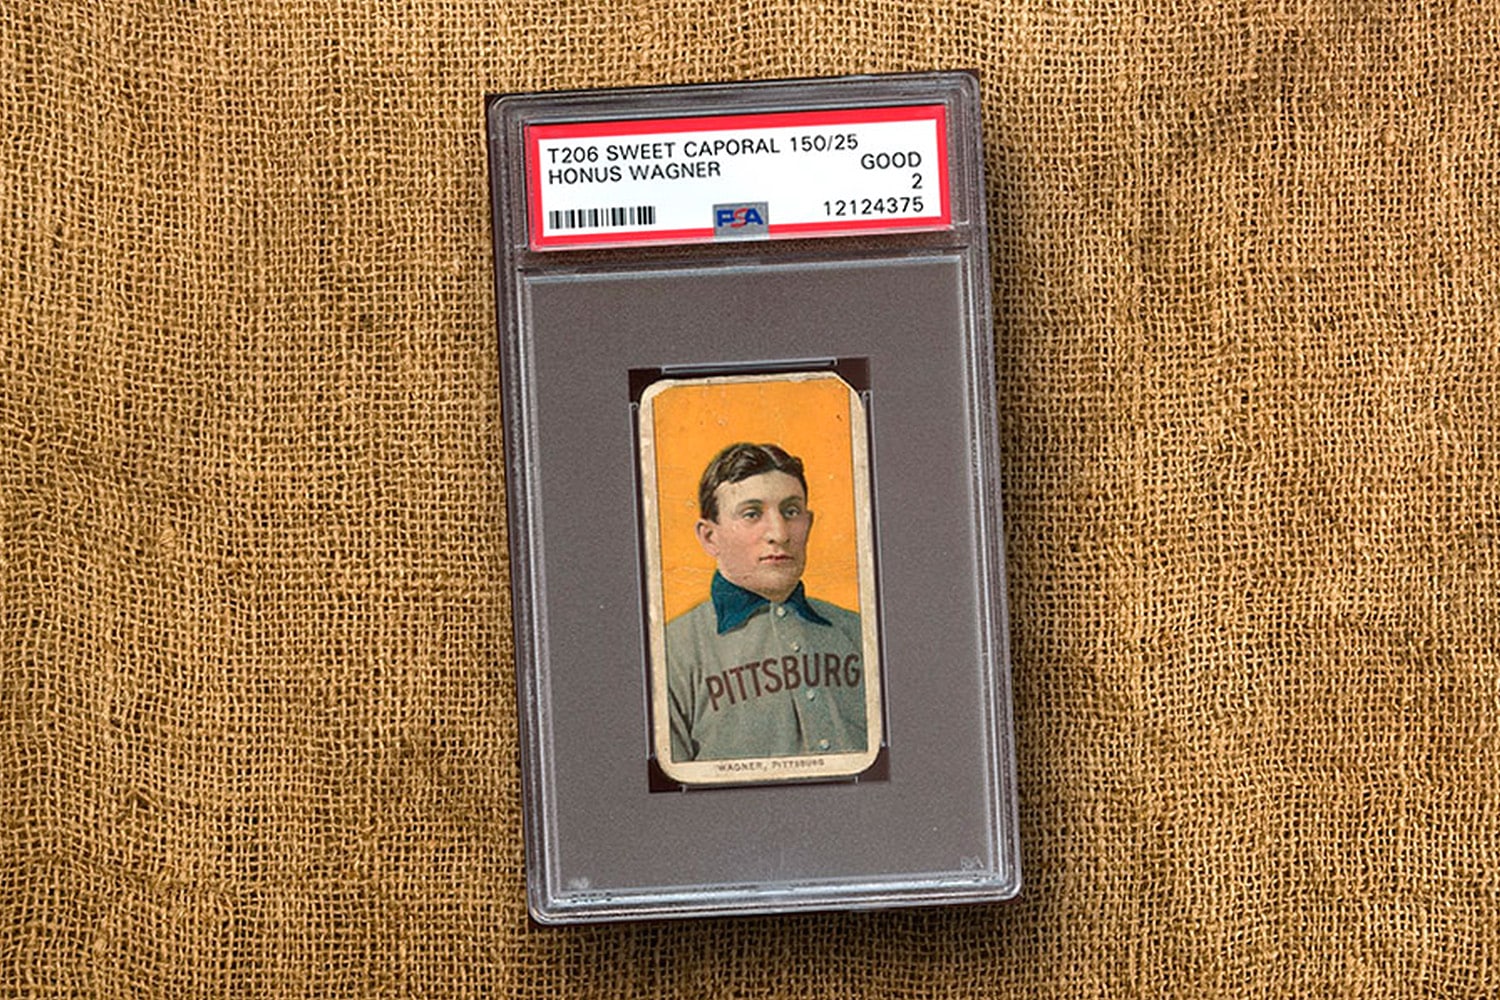 https://frontofficesports.com/wp-content/uploads/2022/08/FOS-22-8.8-Honus-Wagner-Card.jpg?quality=100